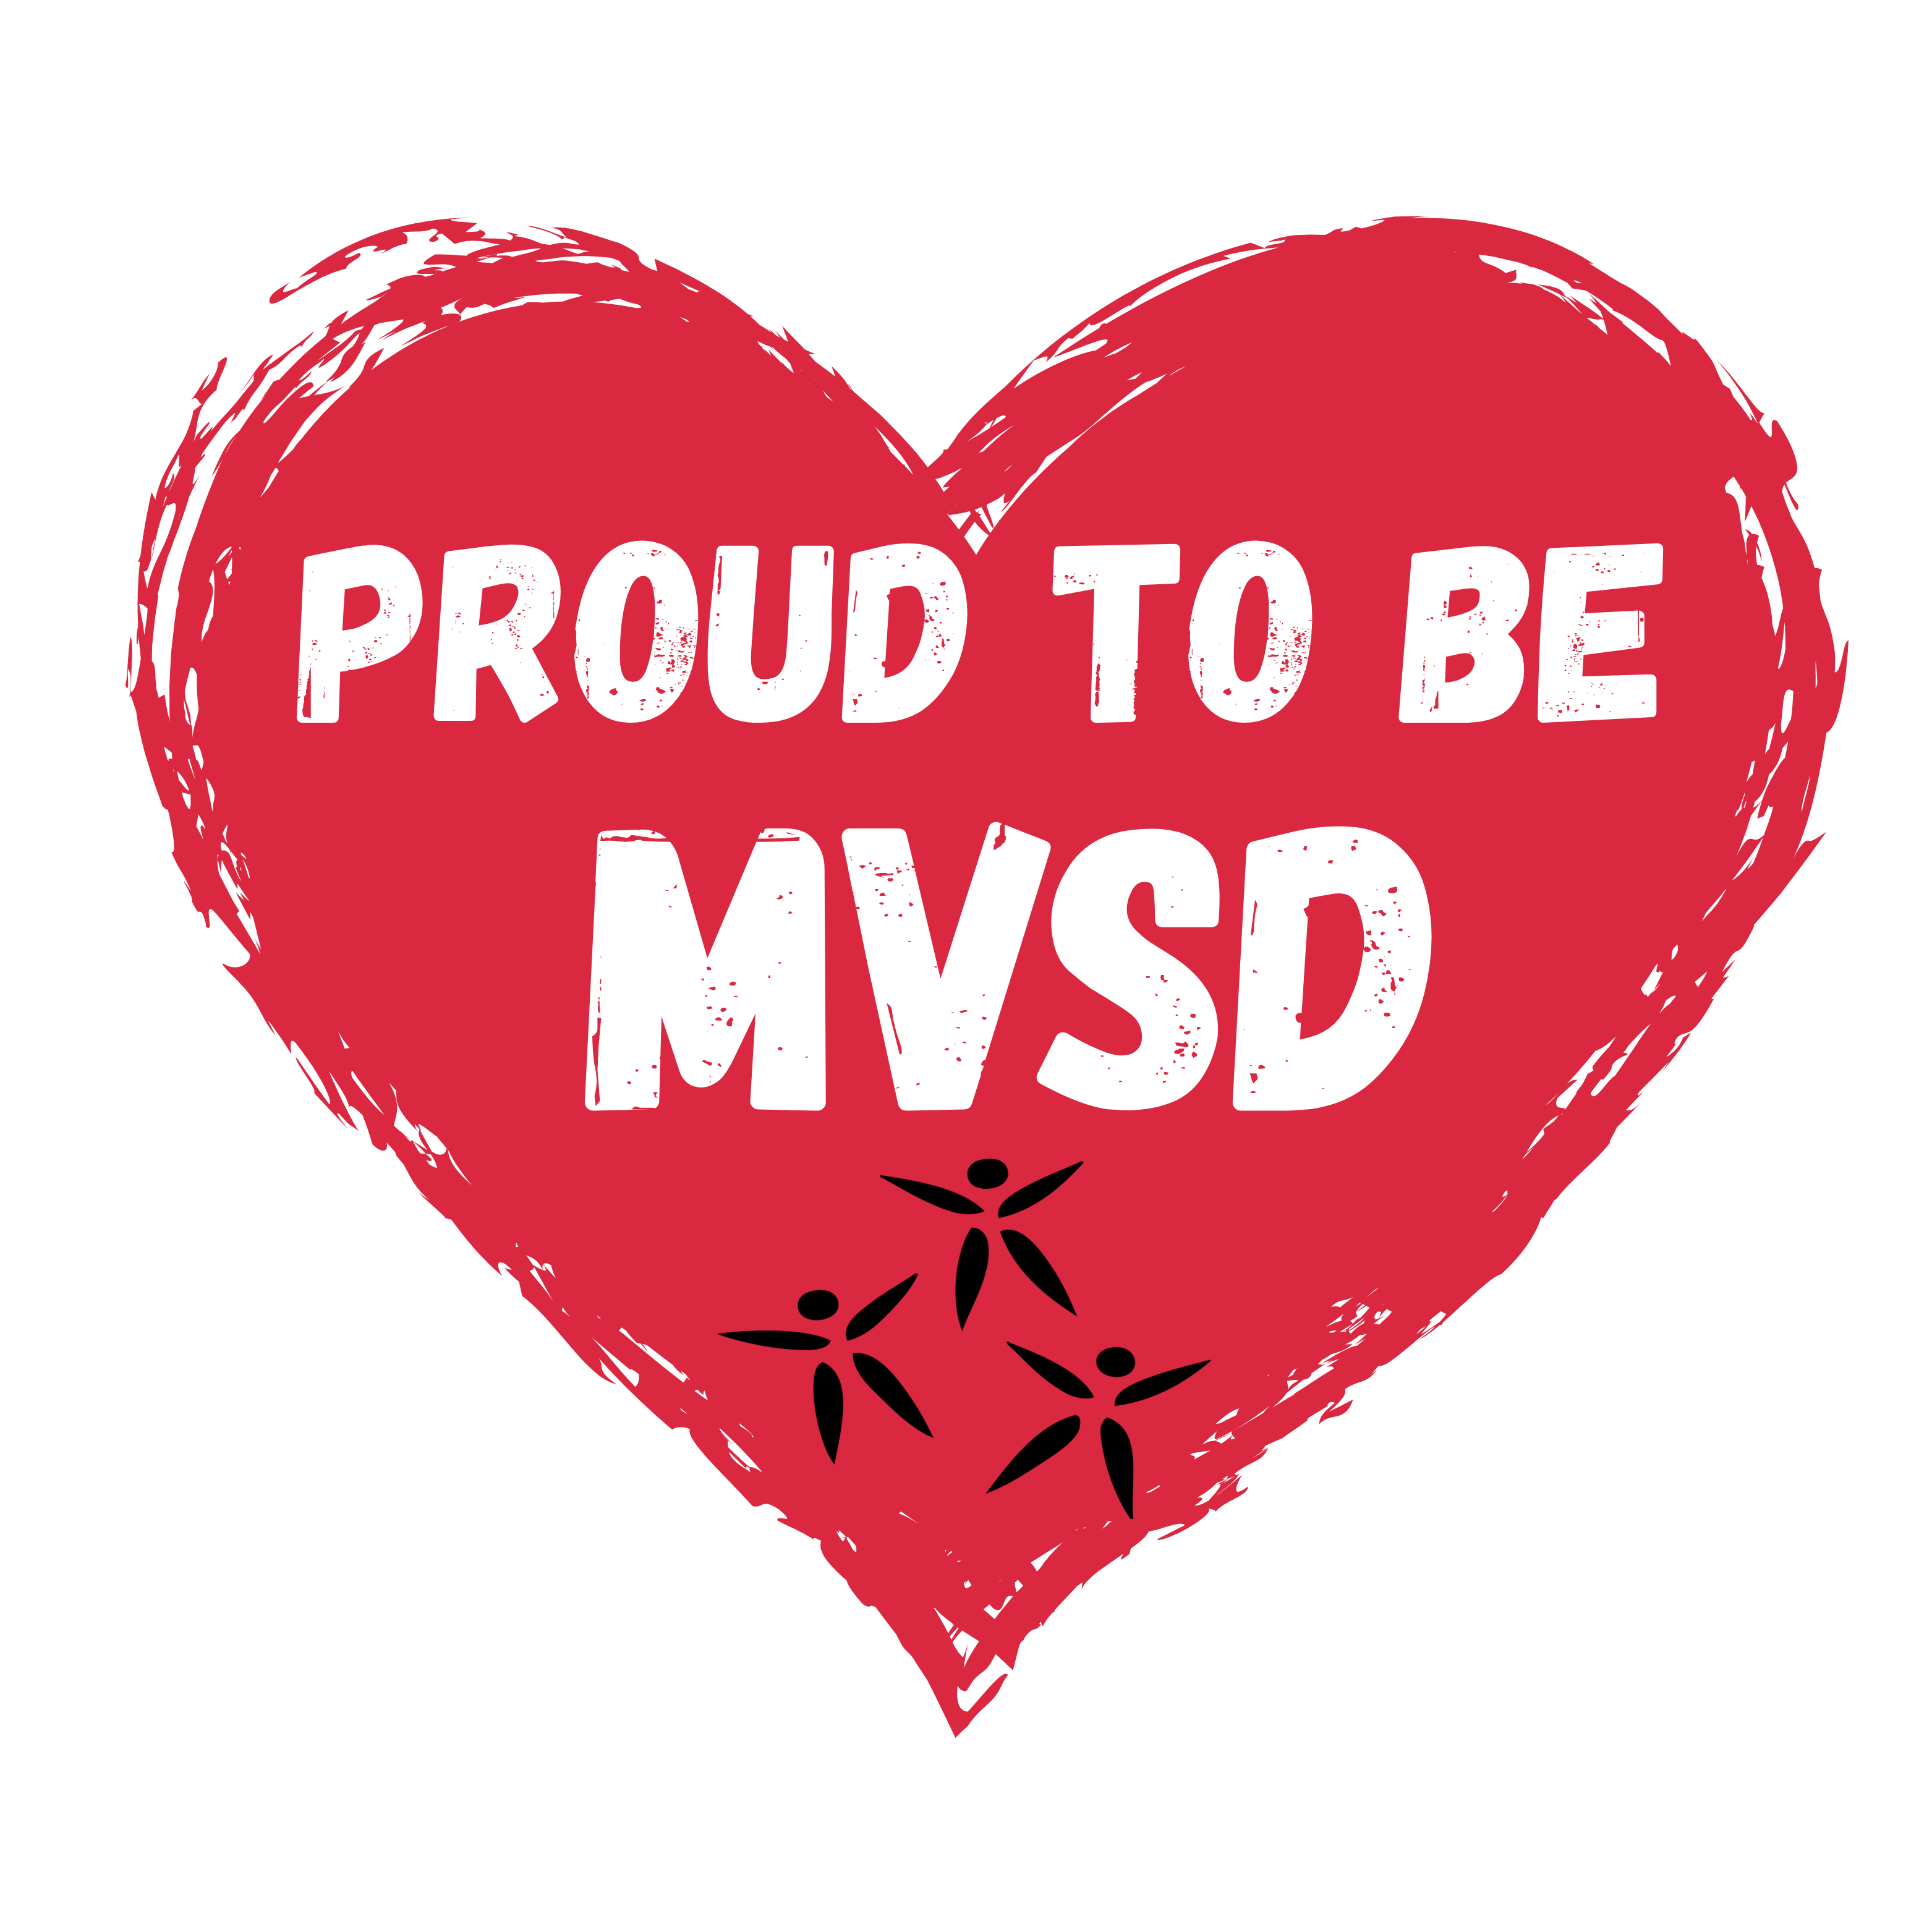 Proud to be MVSD